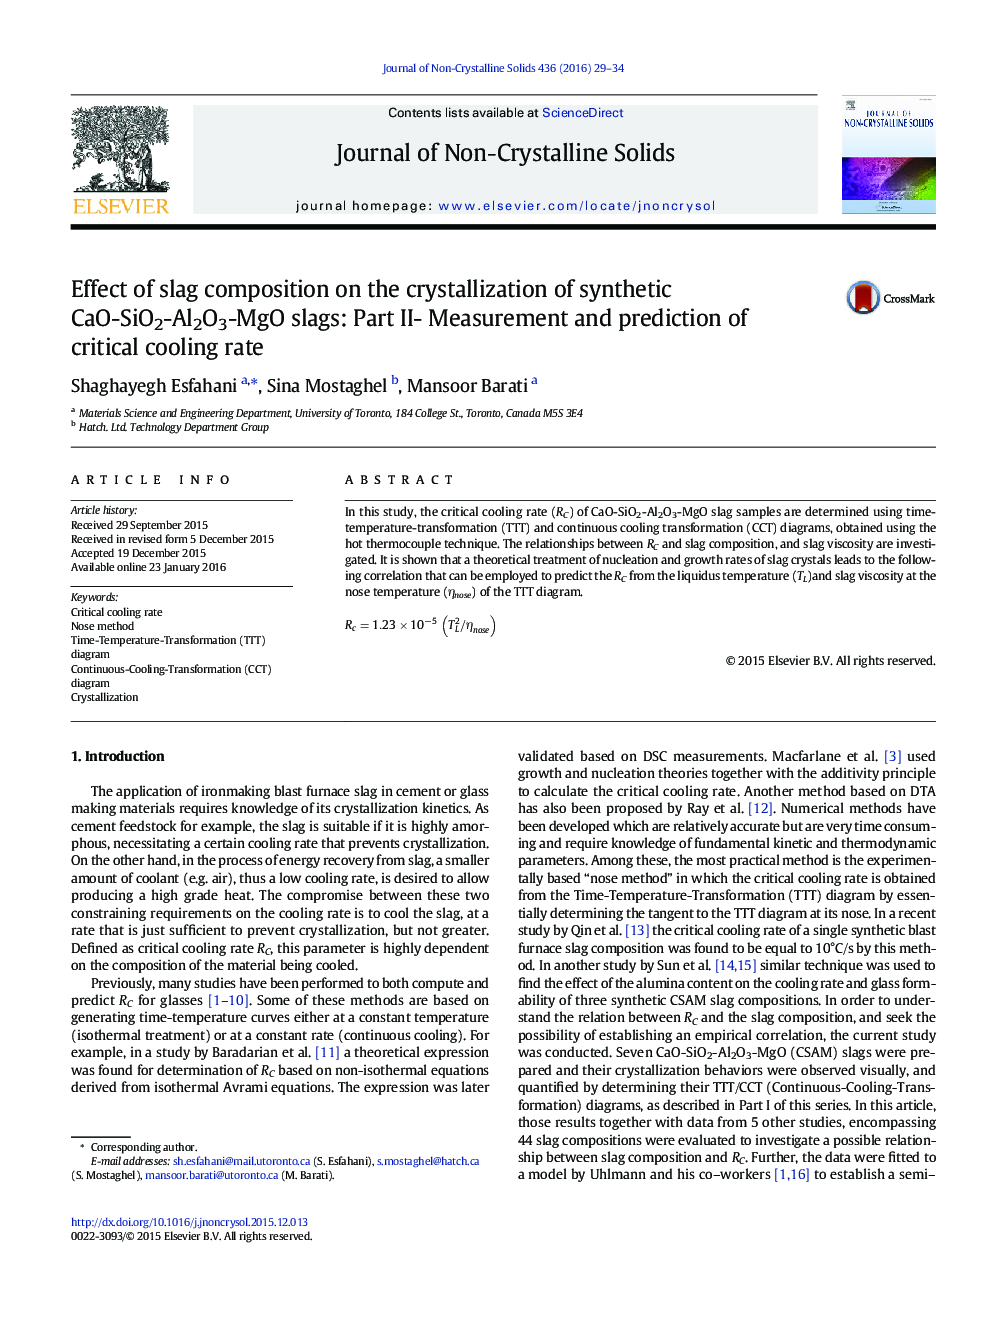 Effect of slag composition on the crystallization of synthetic CaO-SiO2-Al2O3-MgO slags: Part II- Measurement and prediction of critical cooling rate